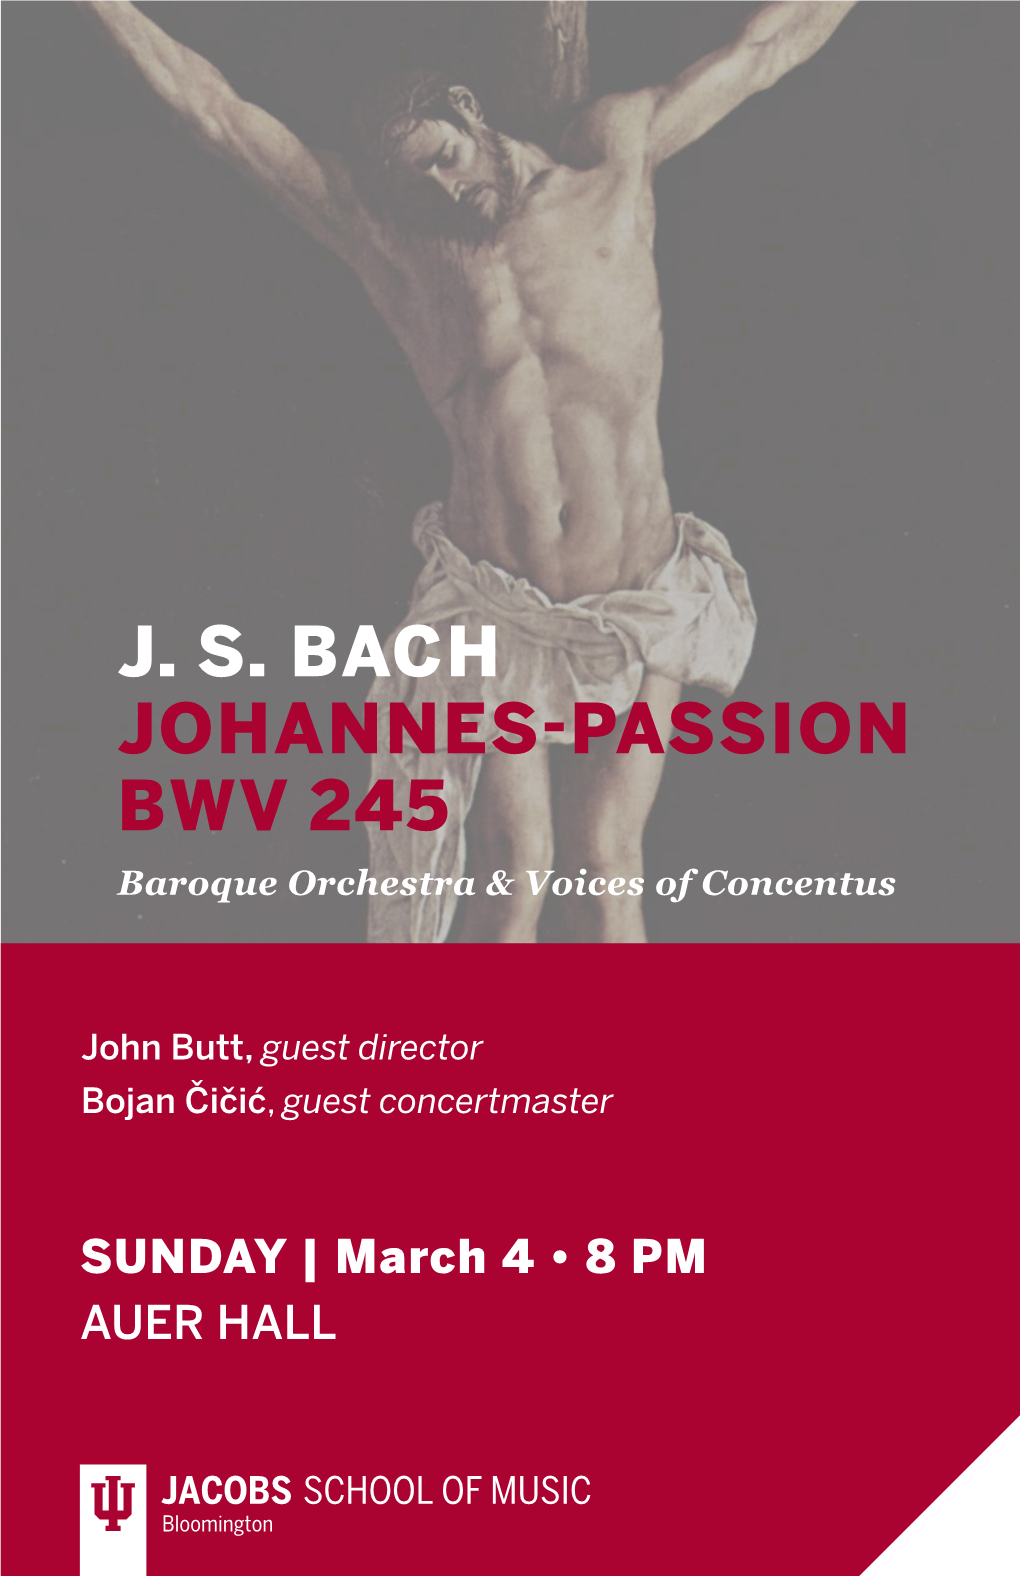 J. S. BACH JOHANNES-PASSION BWV 245 Baroque Orchestra & Voices of Concentus